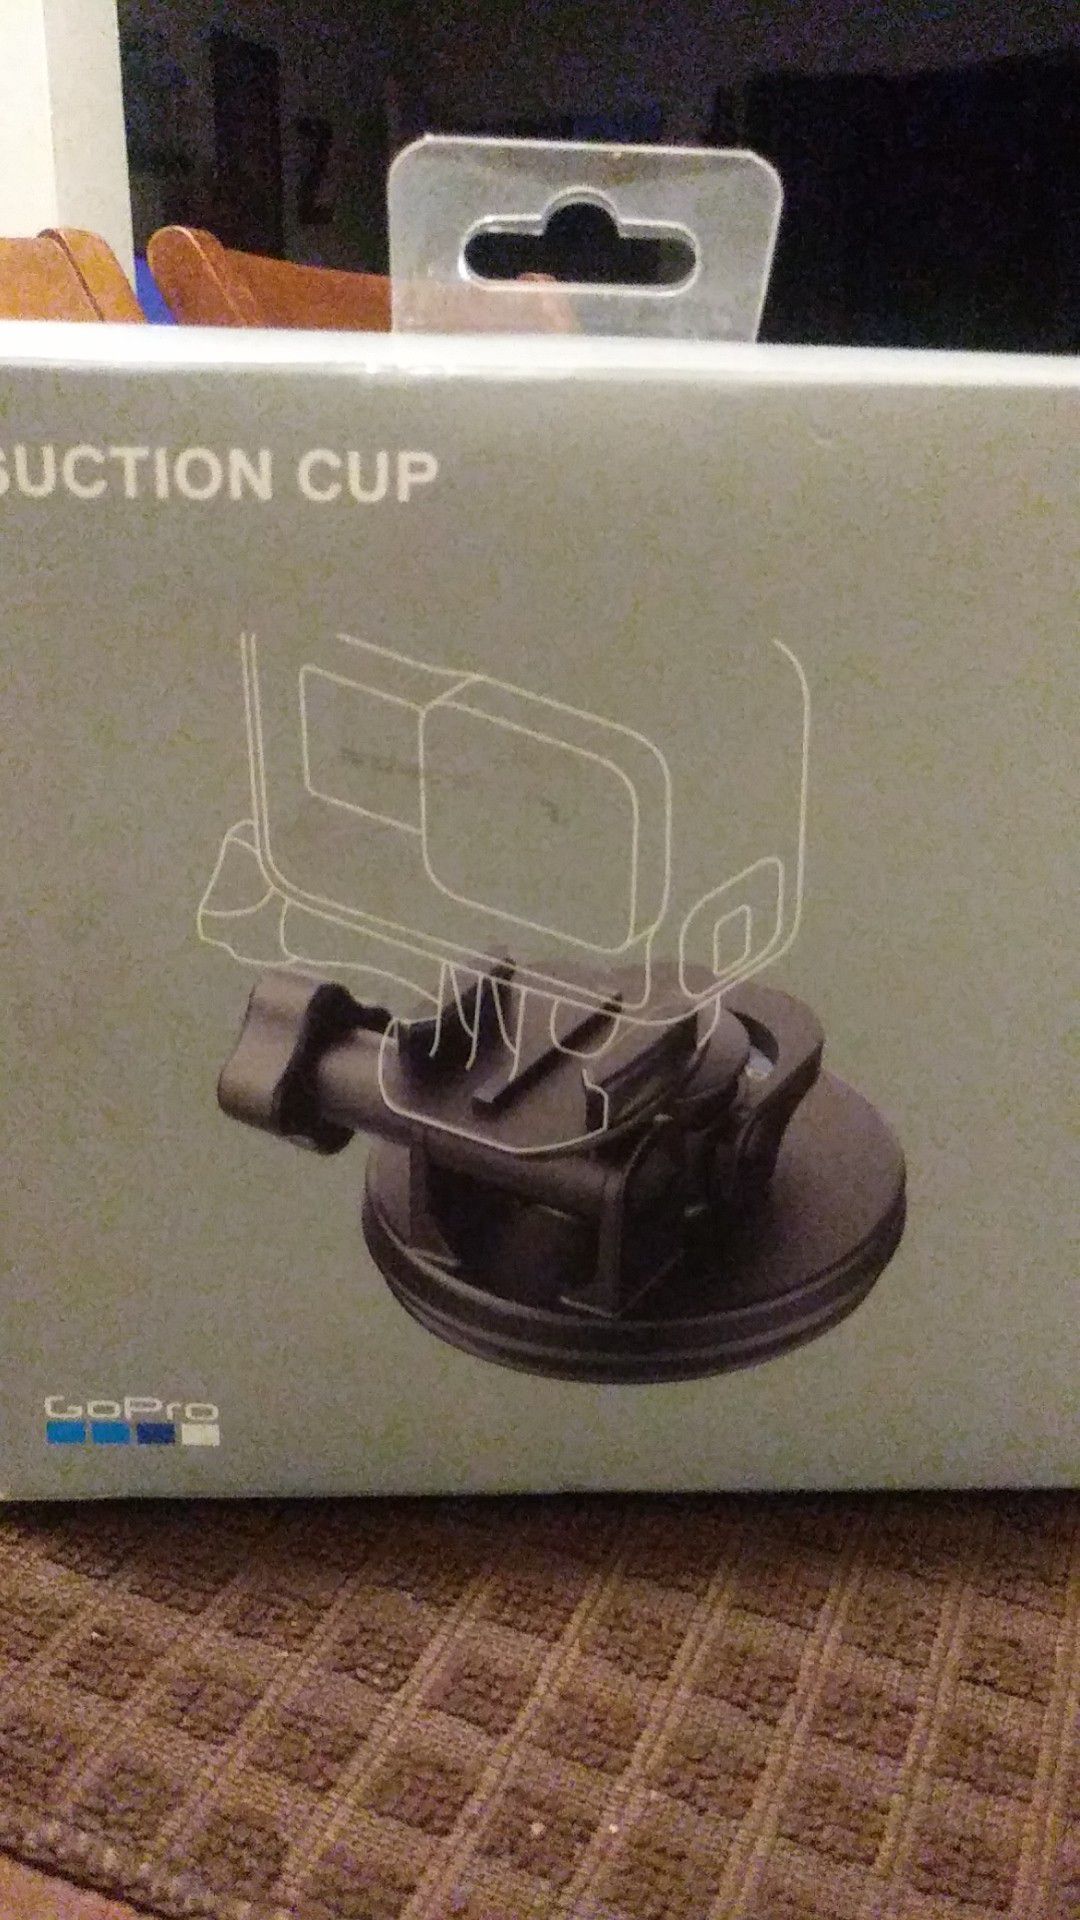 GoPro. Suction Cup